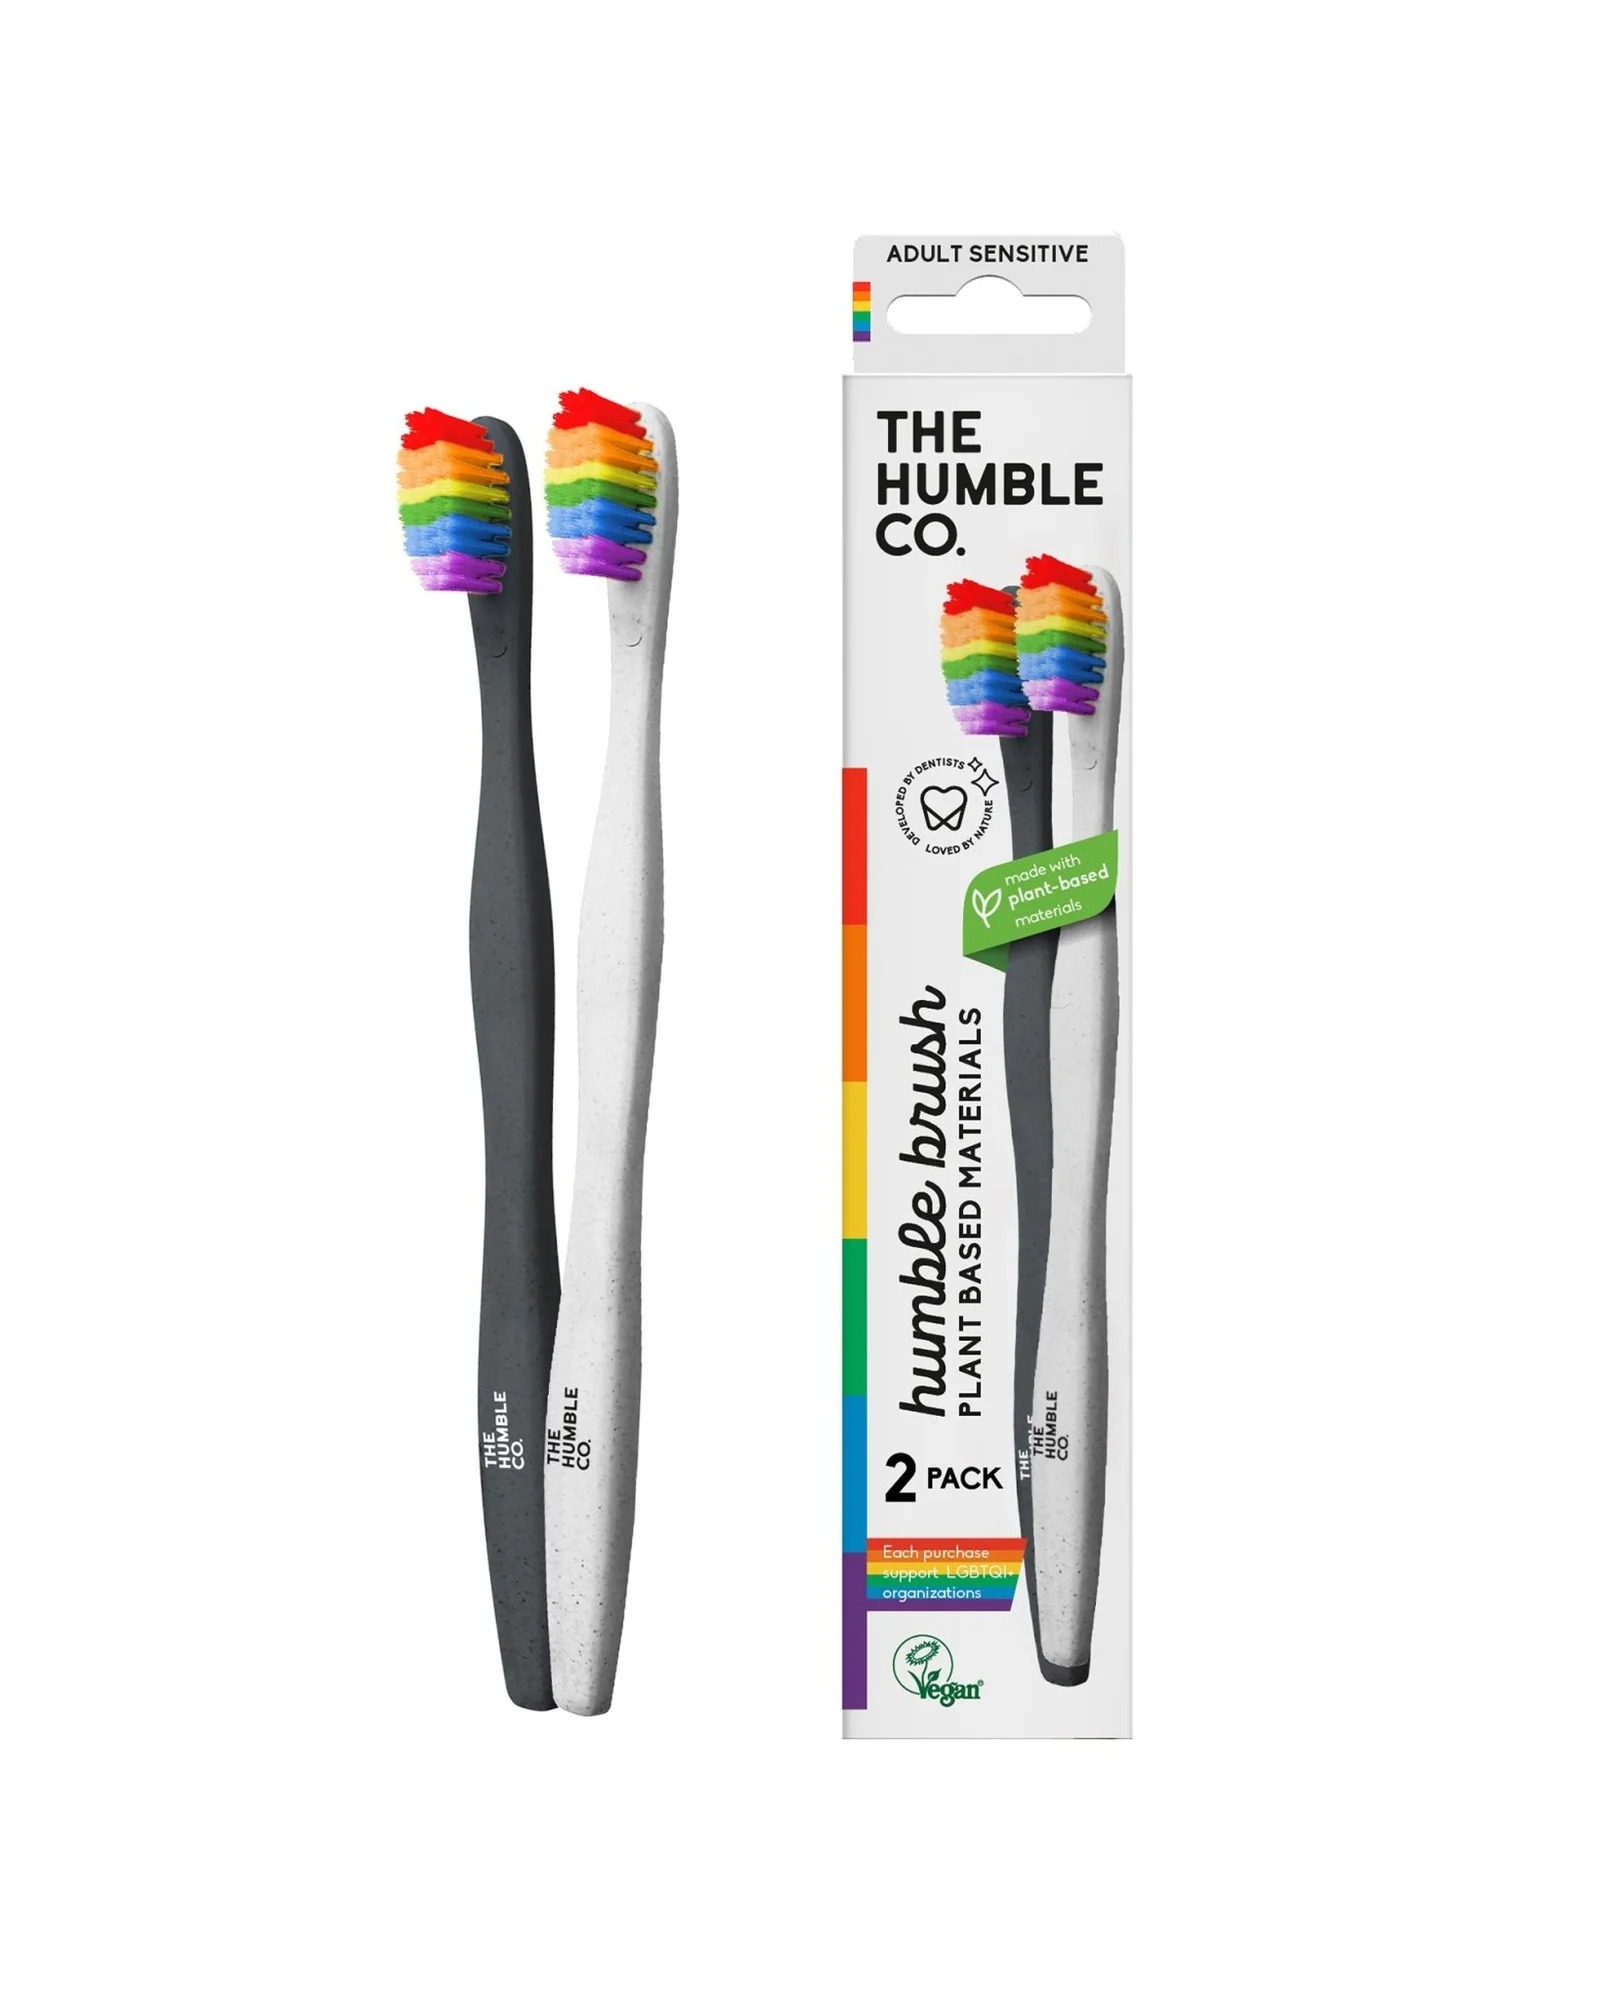 two vegan toothbrushes, one with a grey handle, one with a white handle, both with rainbow nylon bristles next to a white box with a picture of both toothbrushes on it